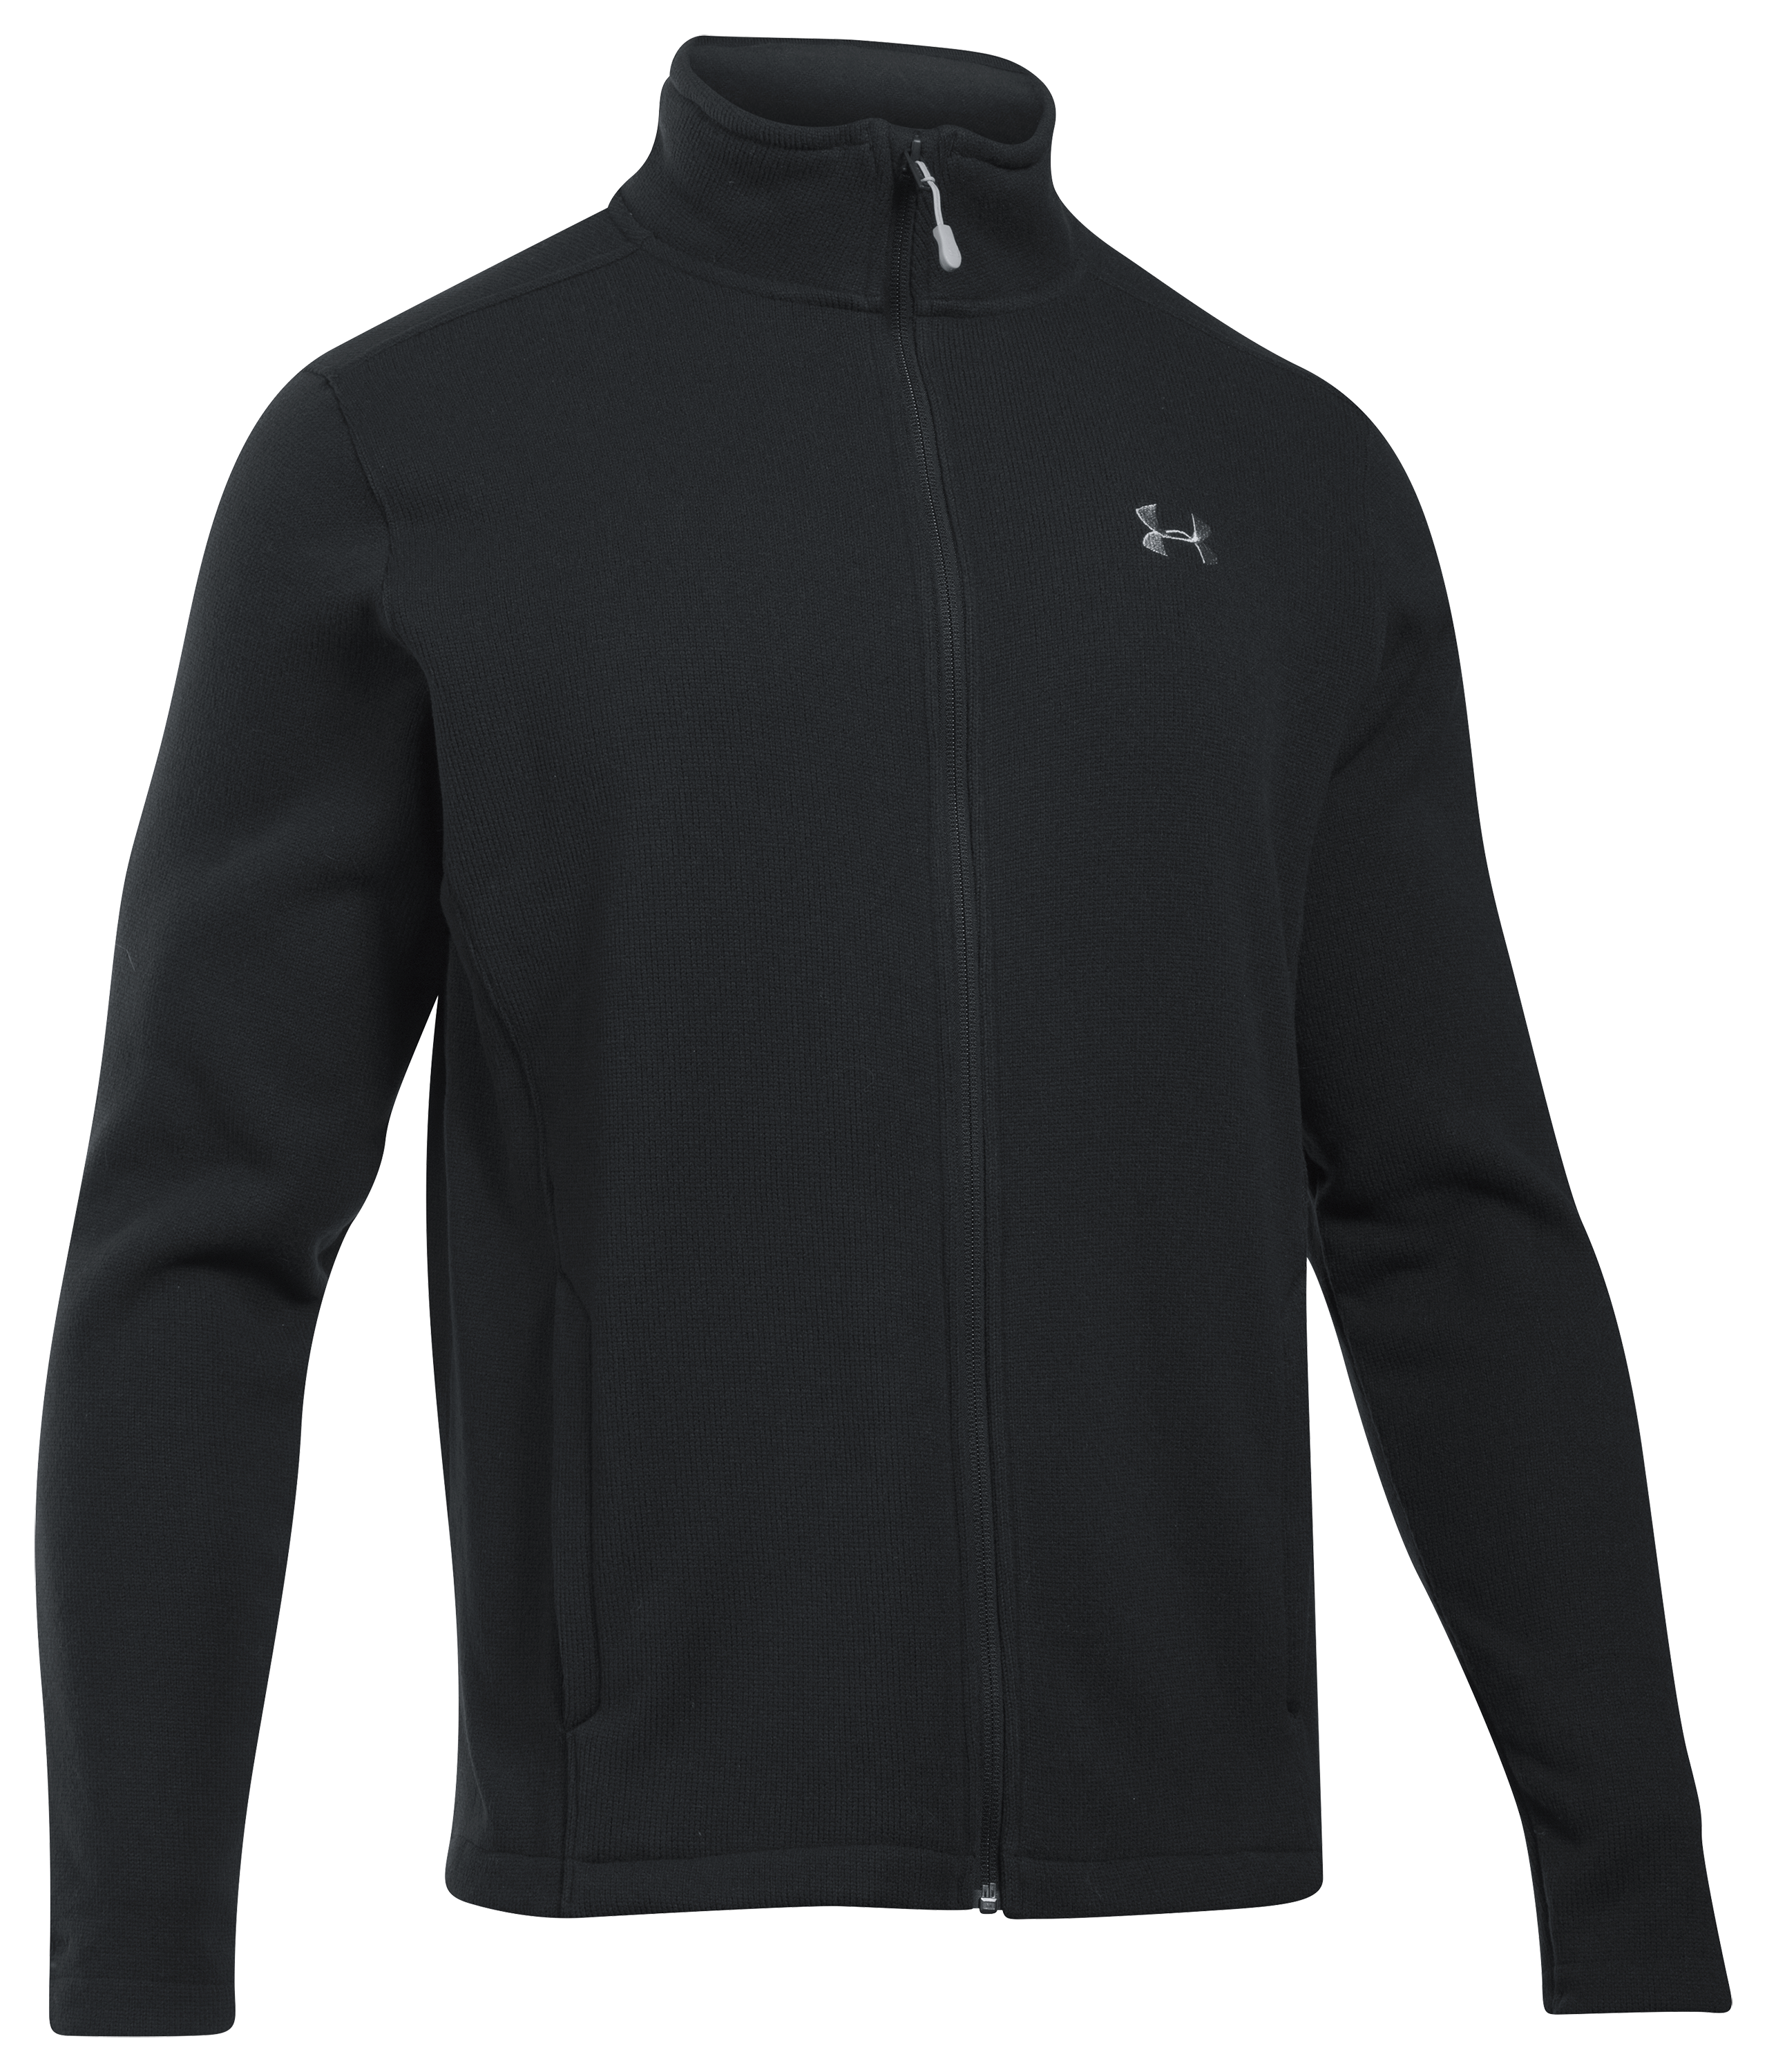 Under Armour Storm Specialist Hiking Jacket for Men | Bass Pro Shops